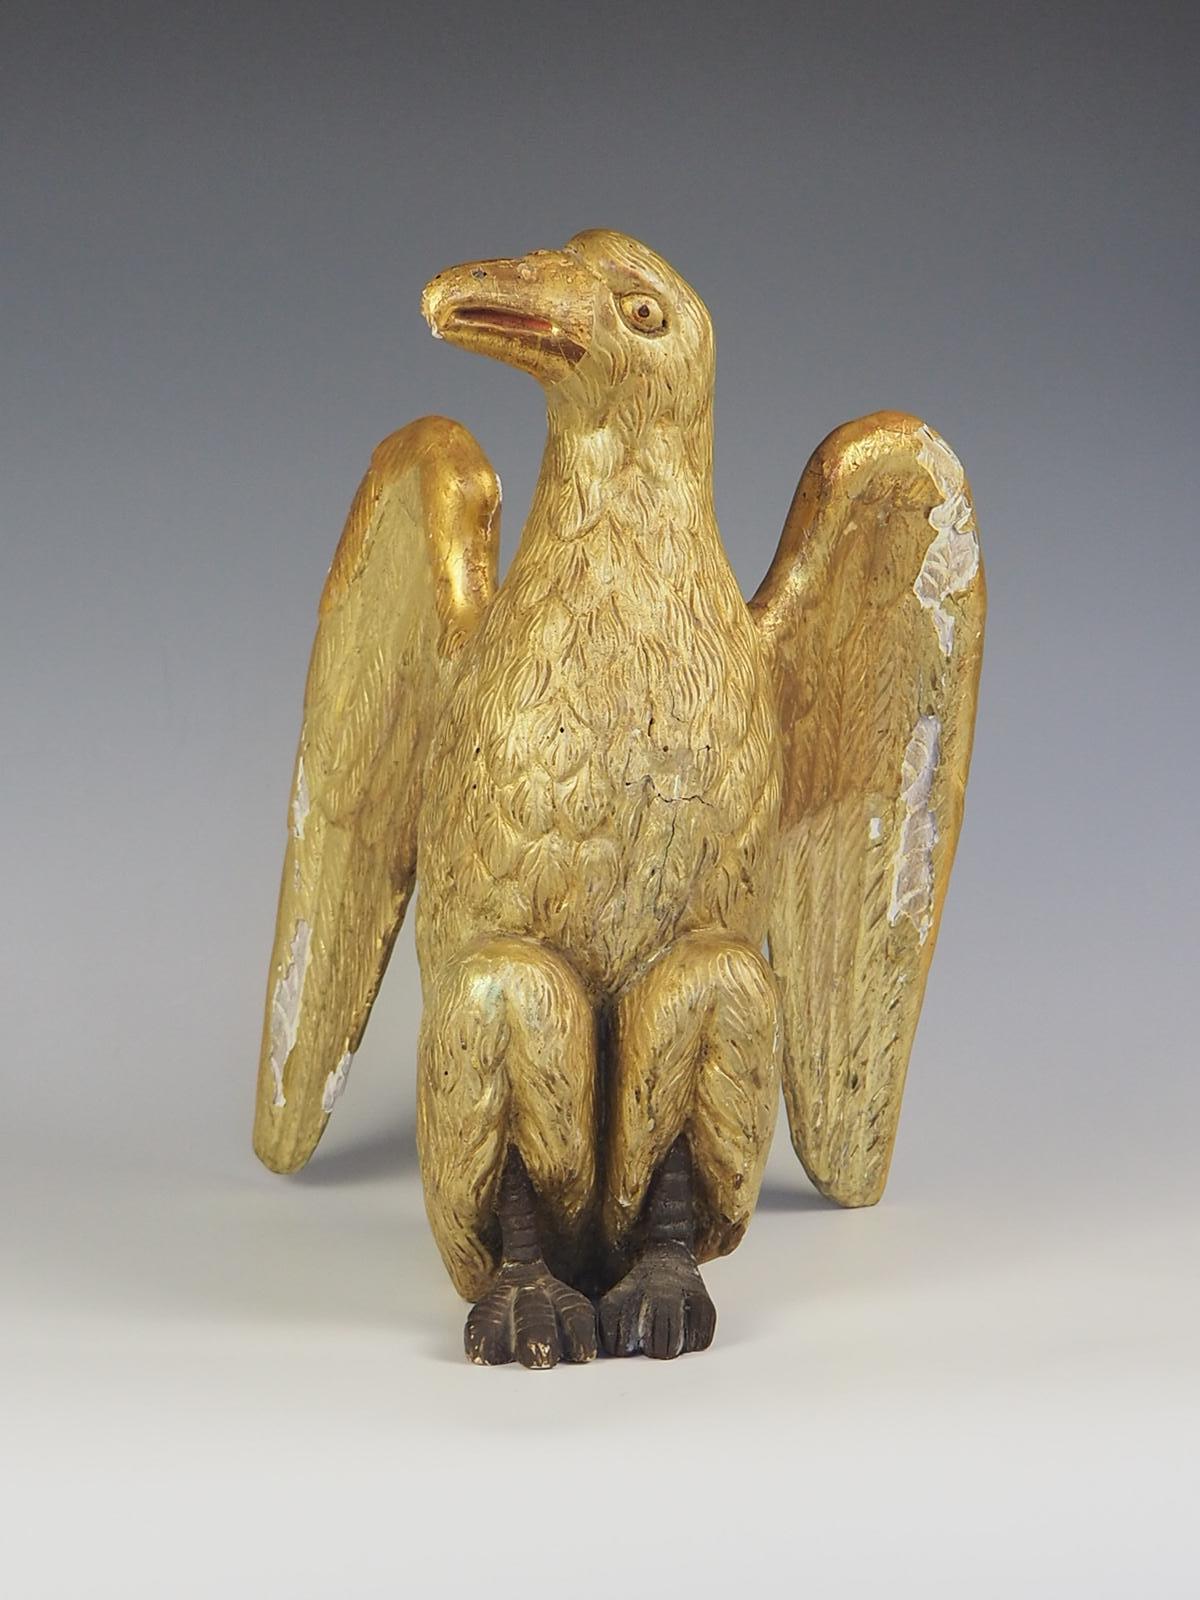 Northern Italian, 17th Century Giltwood Eagle

Hand Carved wooden eagle bird of prey

Gilded and painted over Gesso

Eagles symbolise strength, immortality, and courage.

Can be displayed as pictured or if desired placed on a stand (hole on